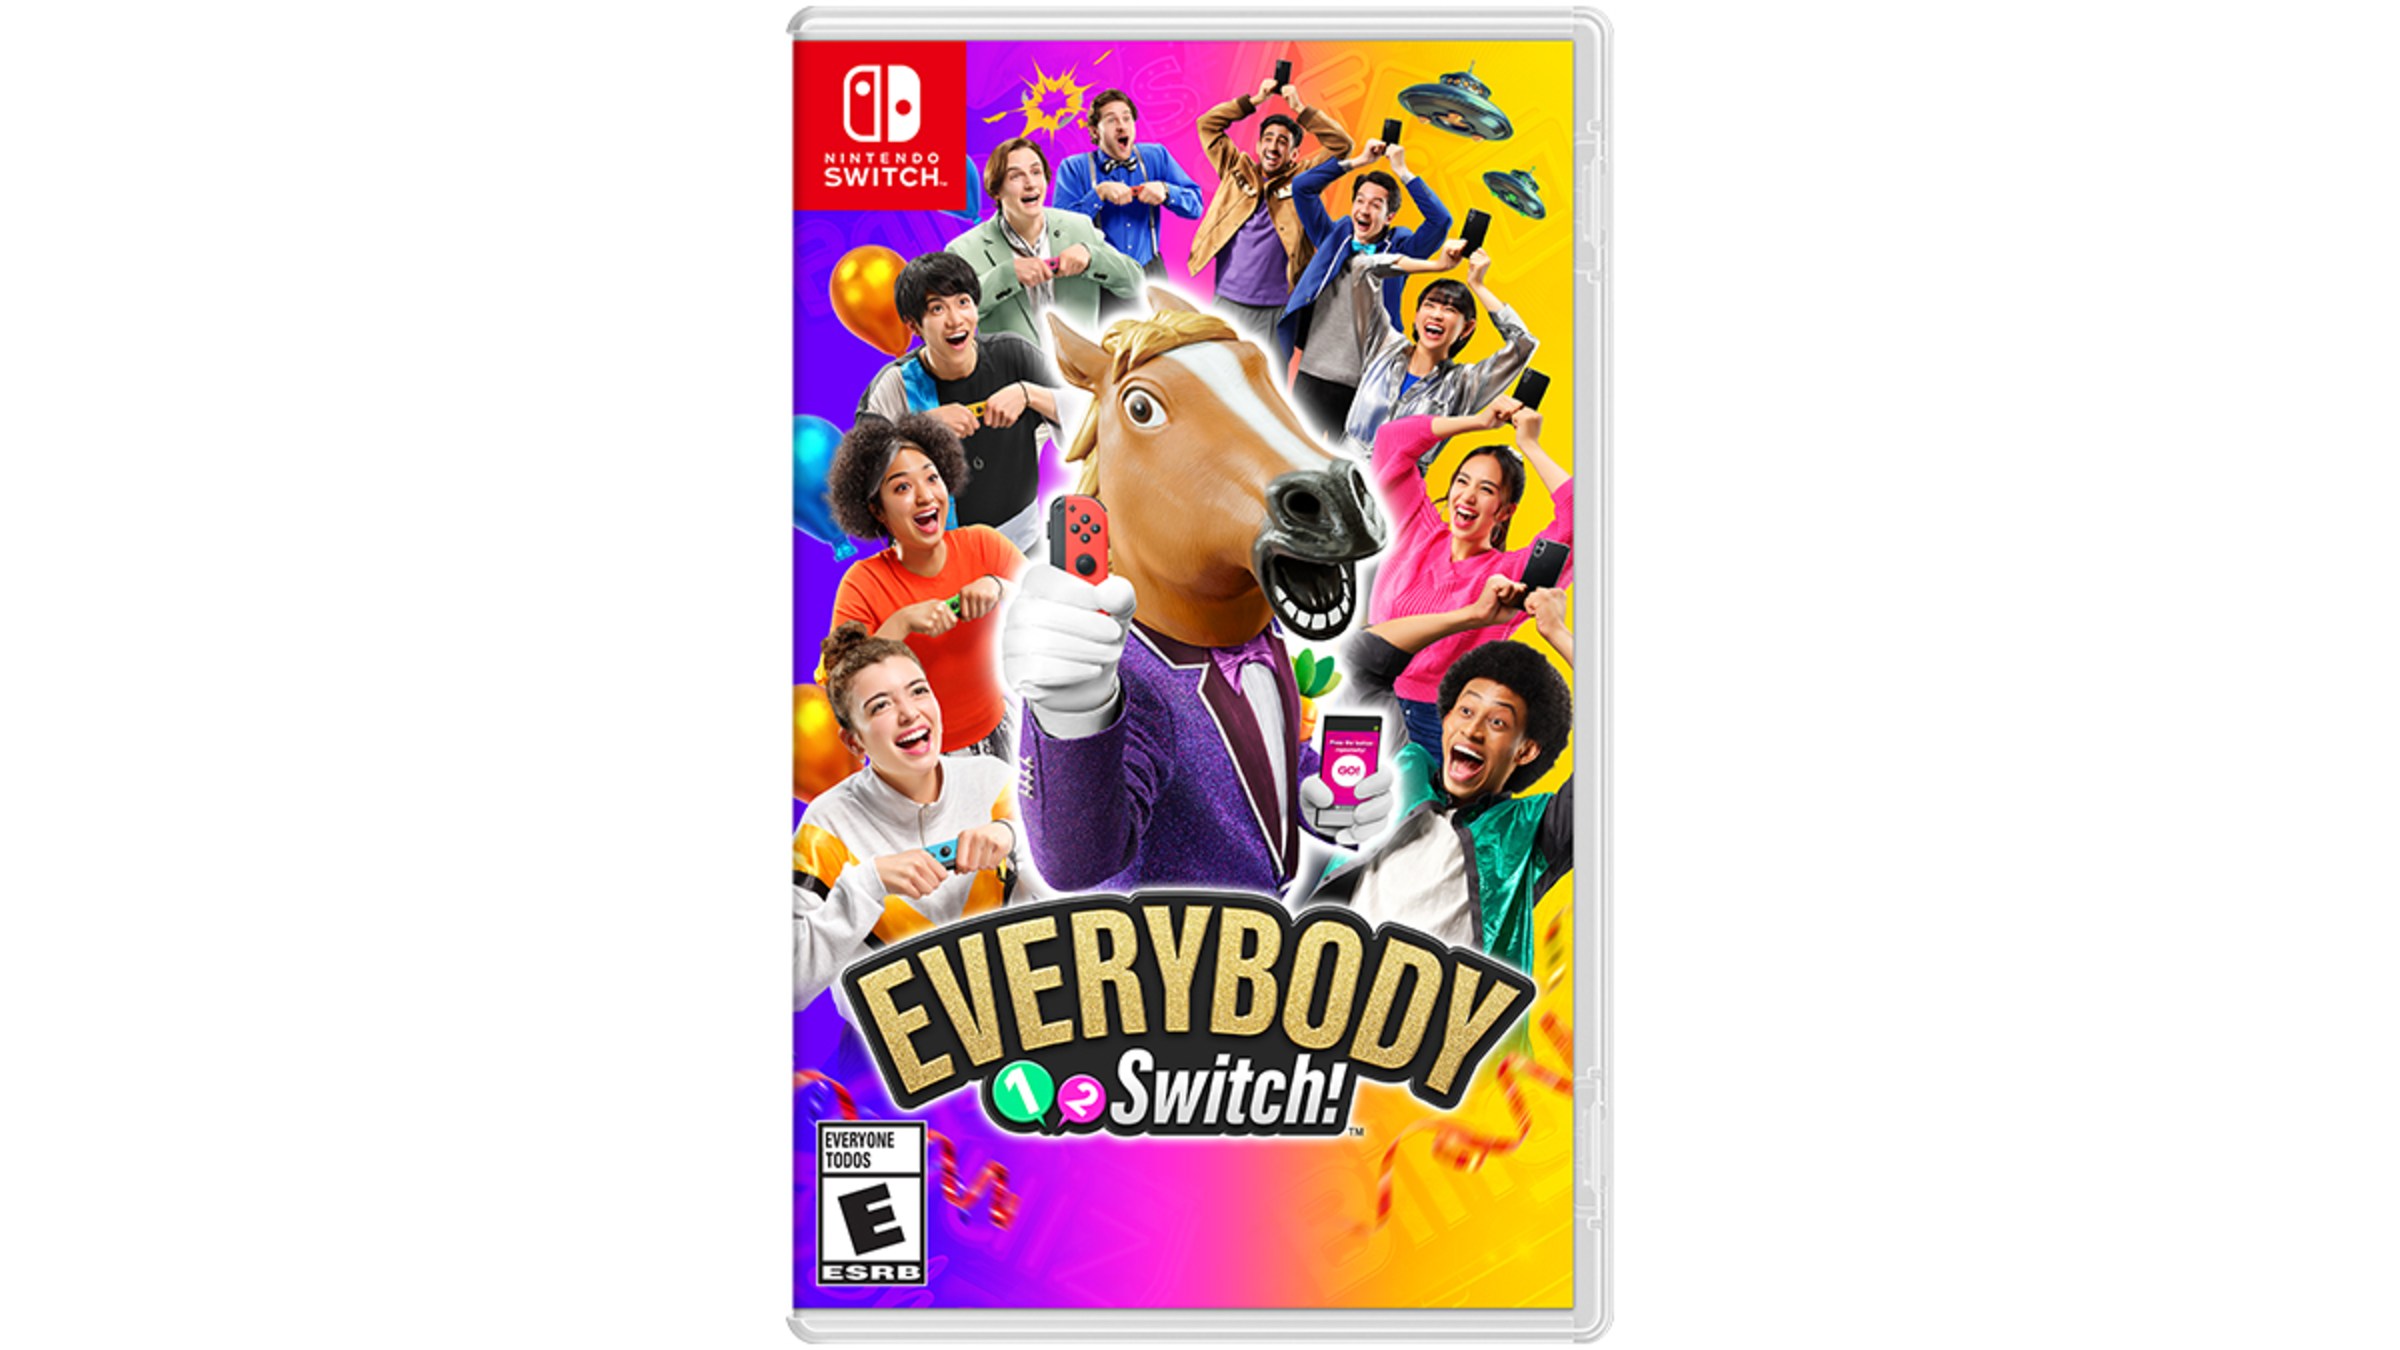 Everybody 1-2-Switch!™ for Nintendo Switch Site Official Nintendo 